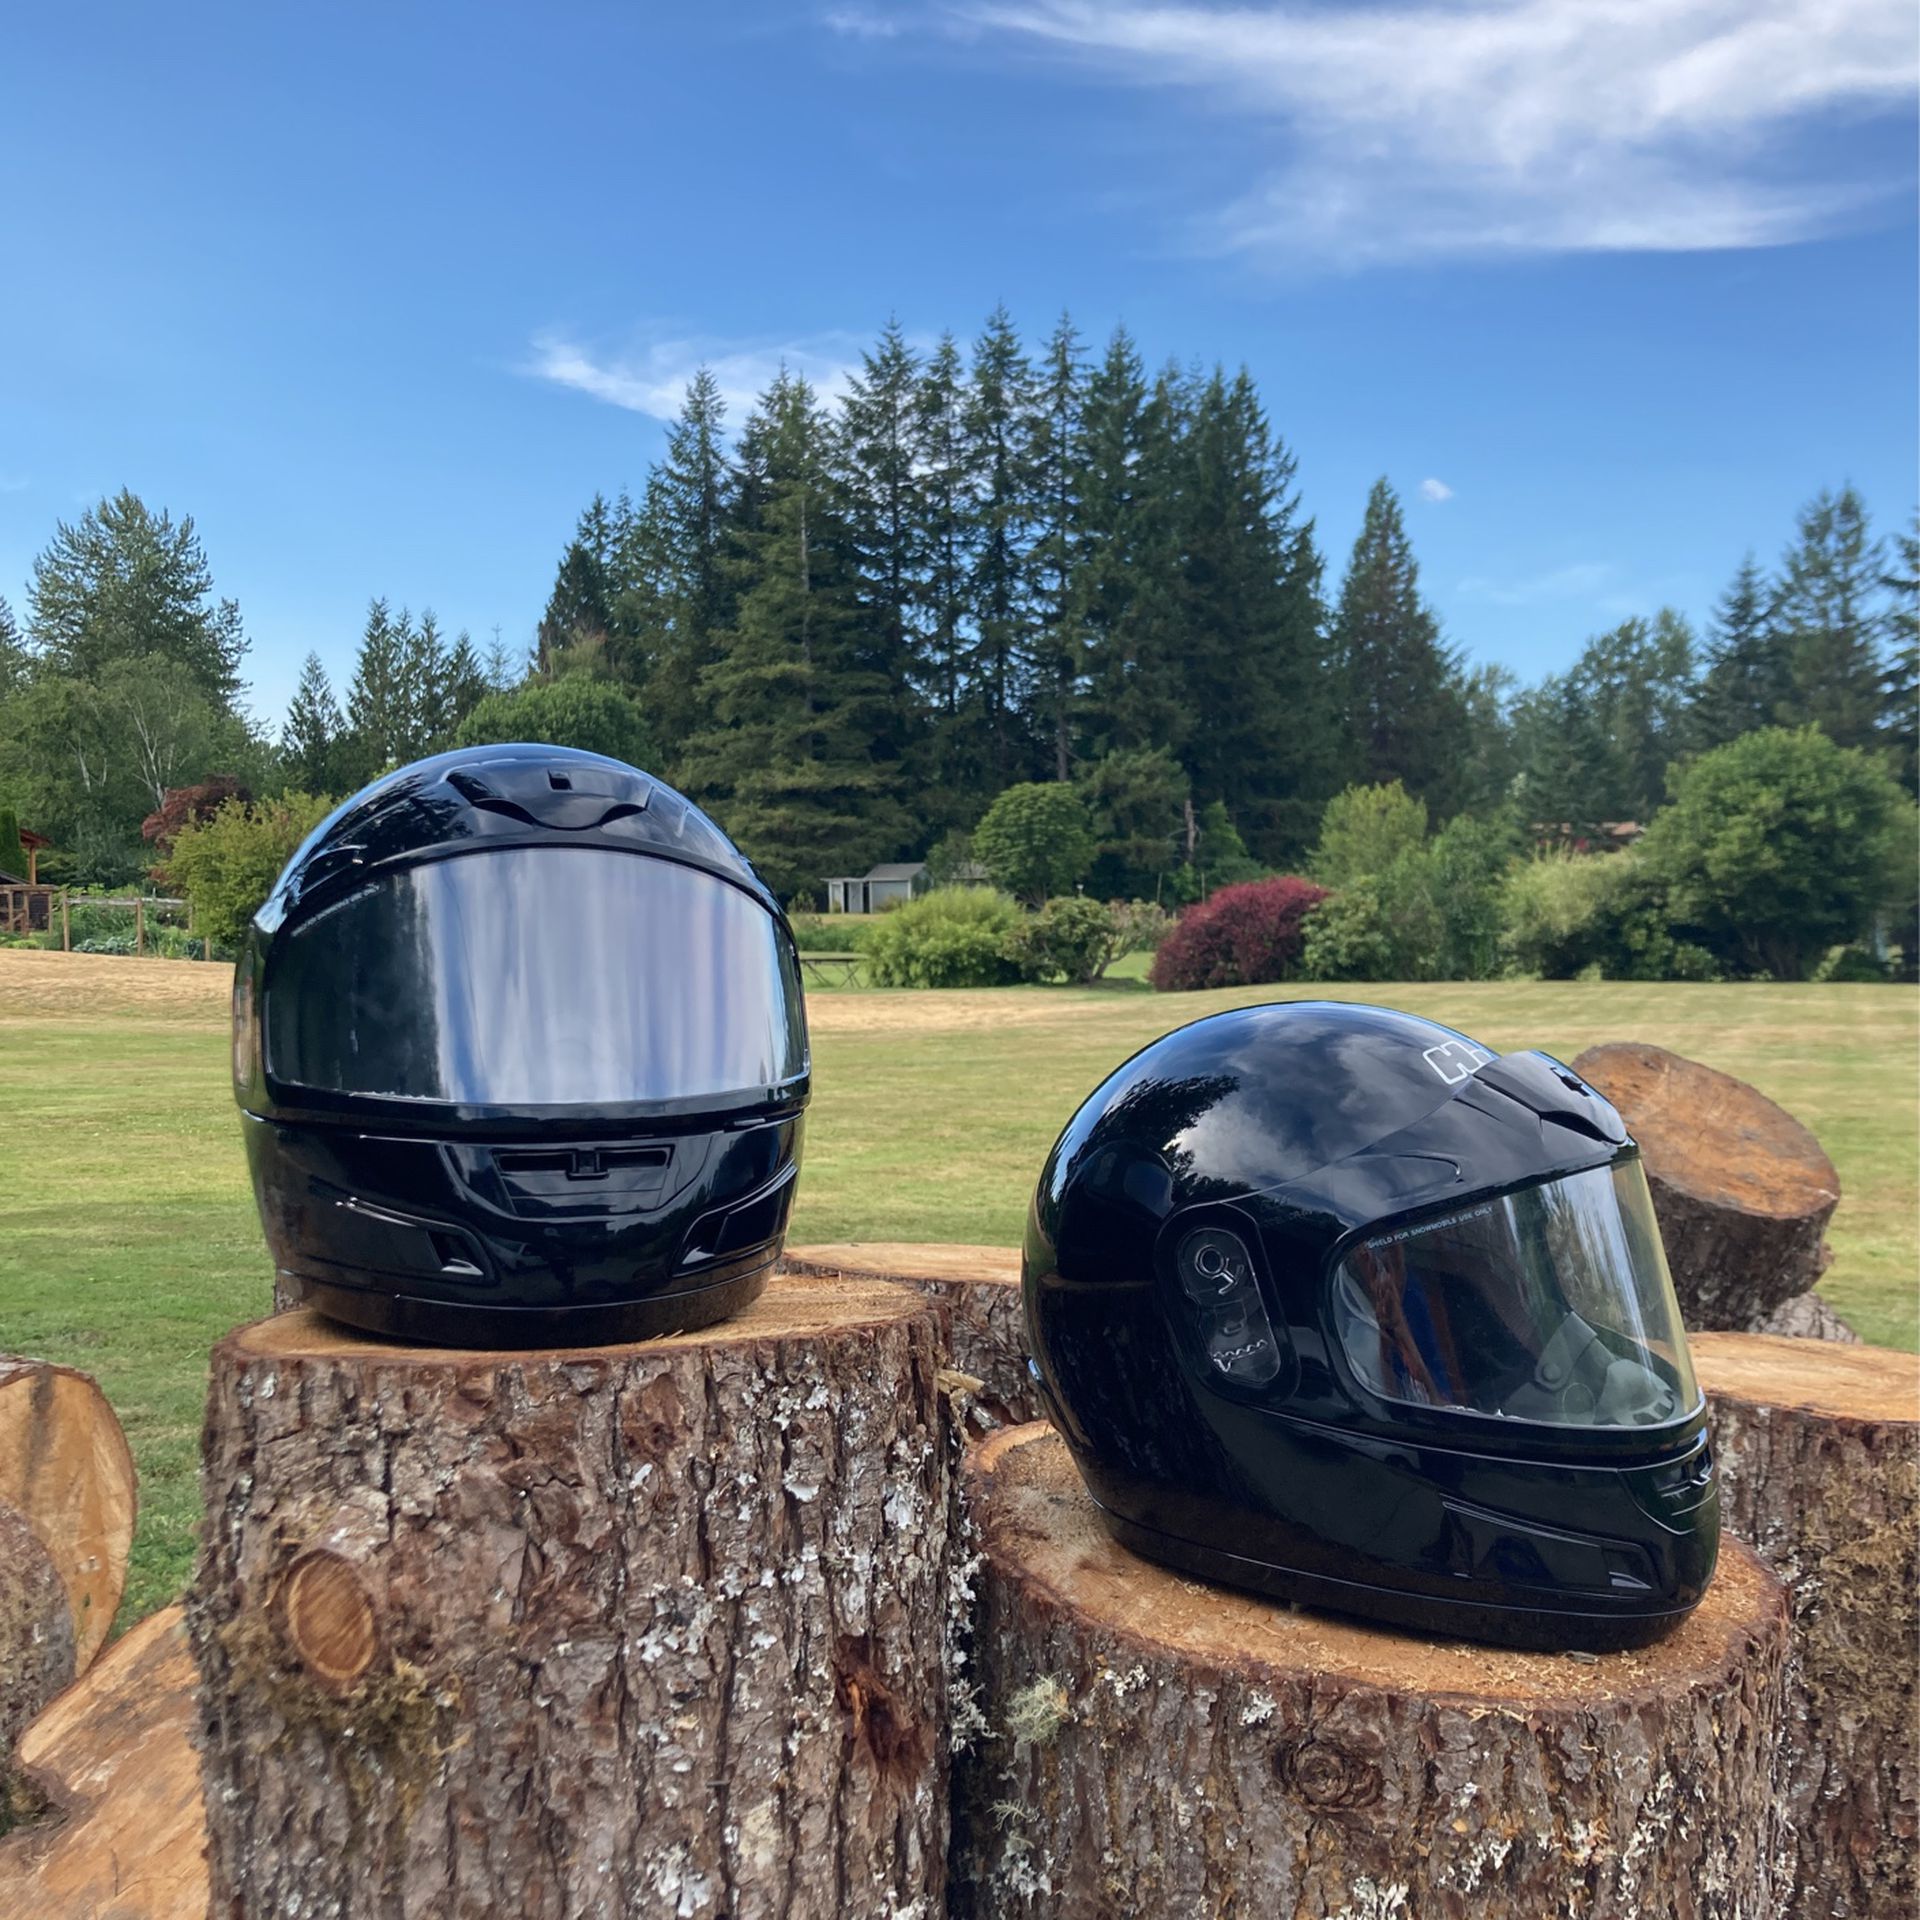 HJC snowmobile helmets, size small and extra large